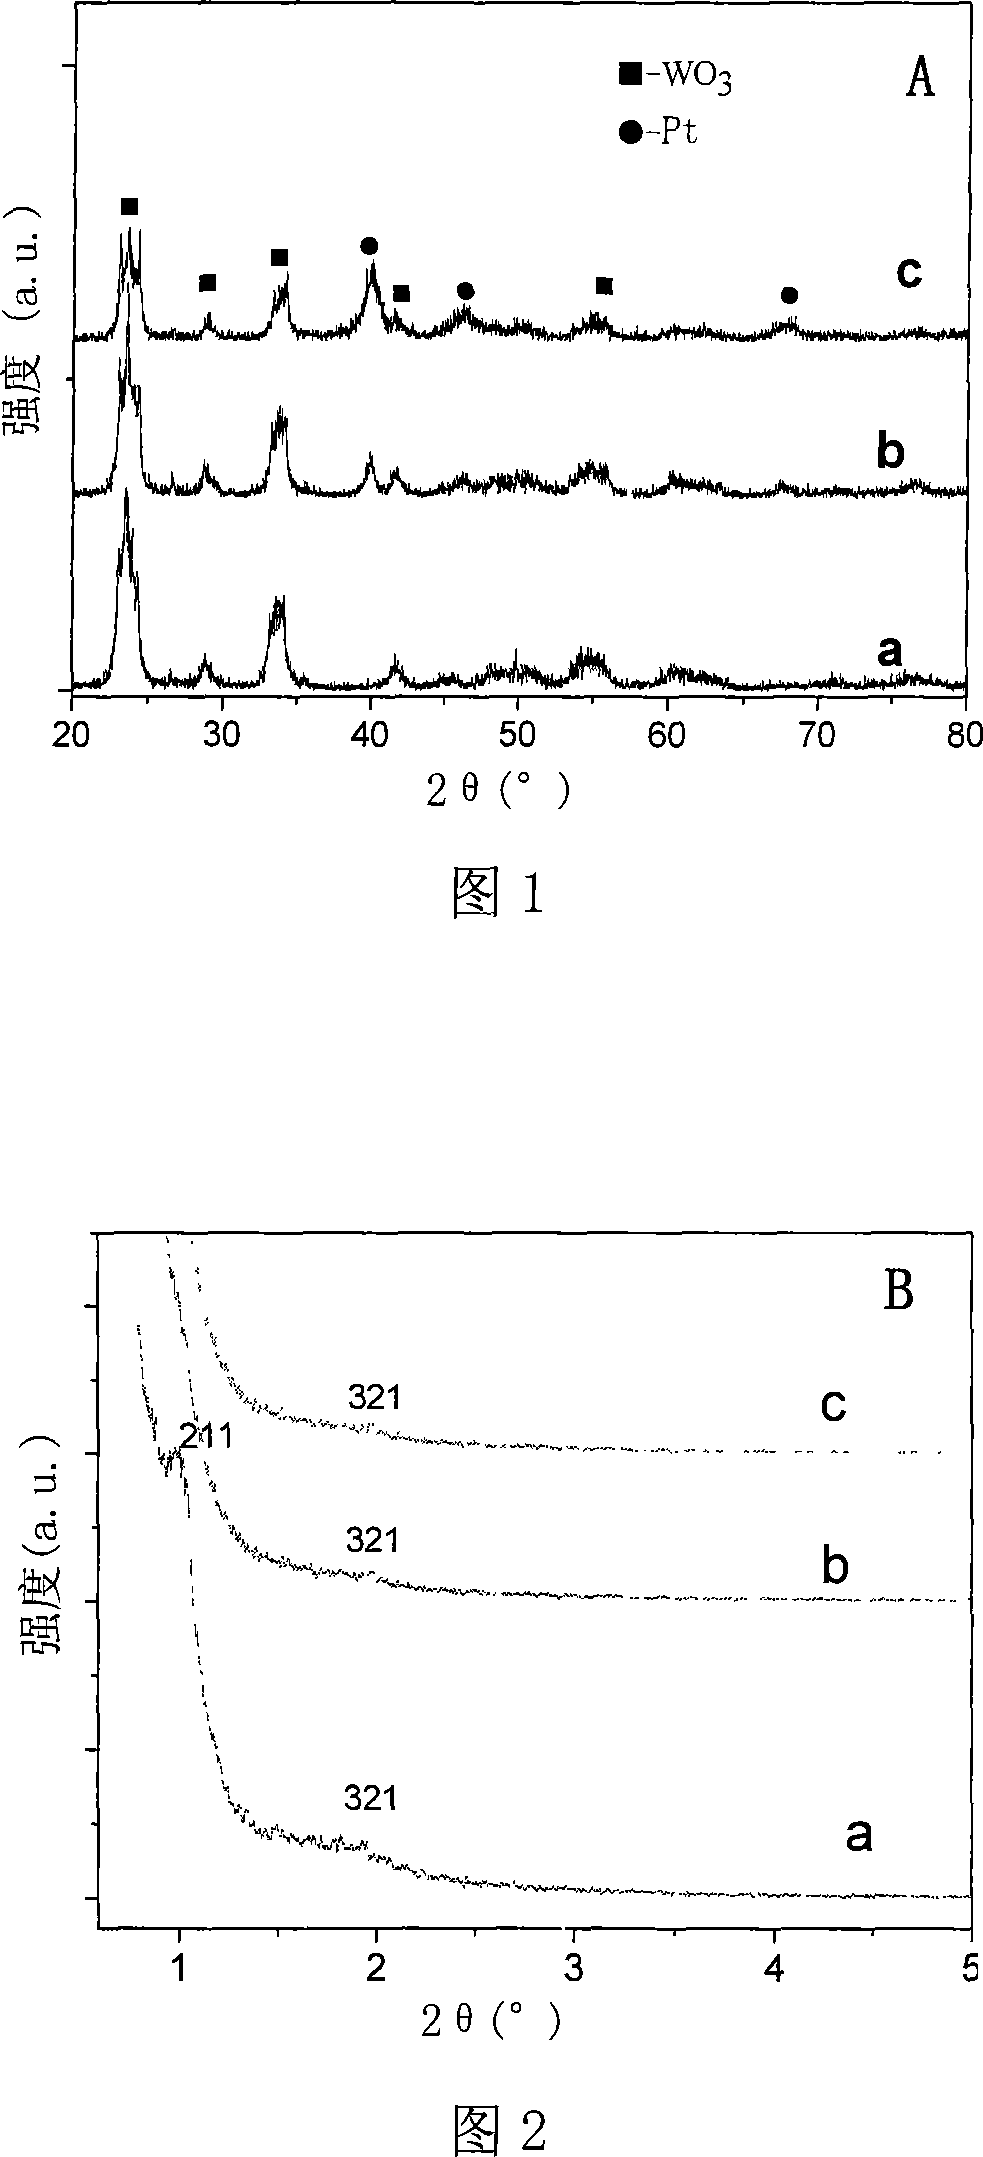 A mesoporous Pt/WO* electro-catalyst and its preparing method